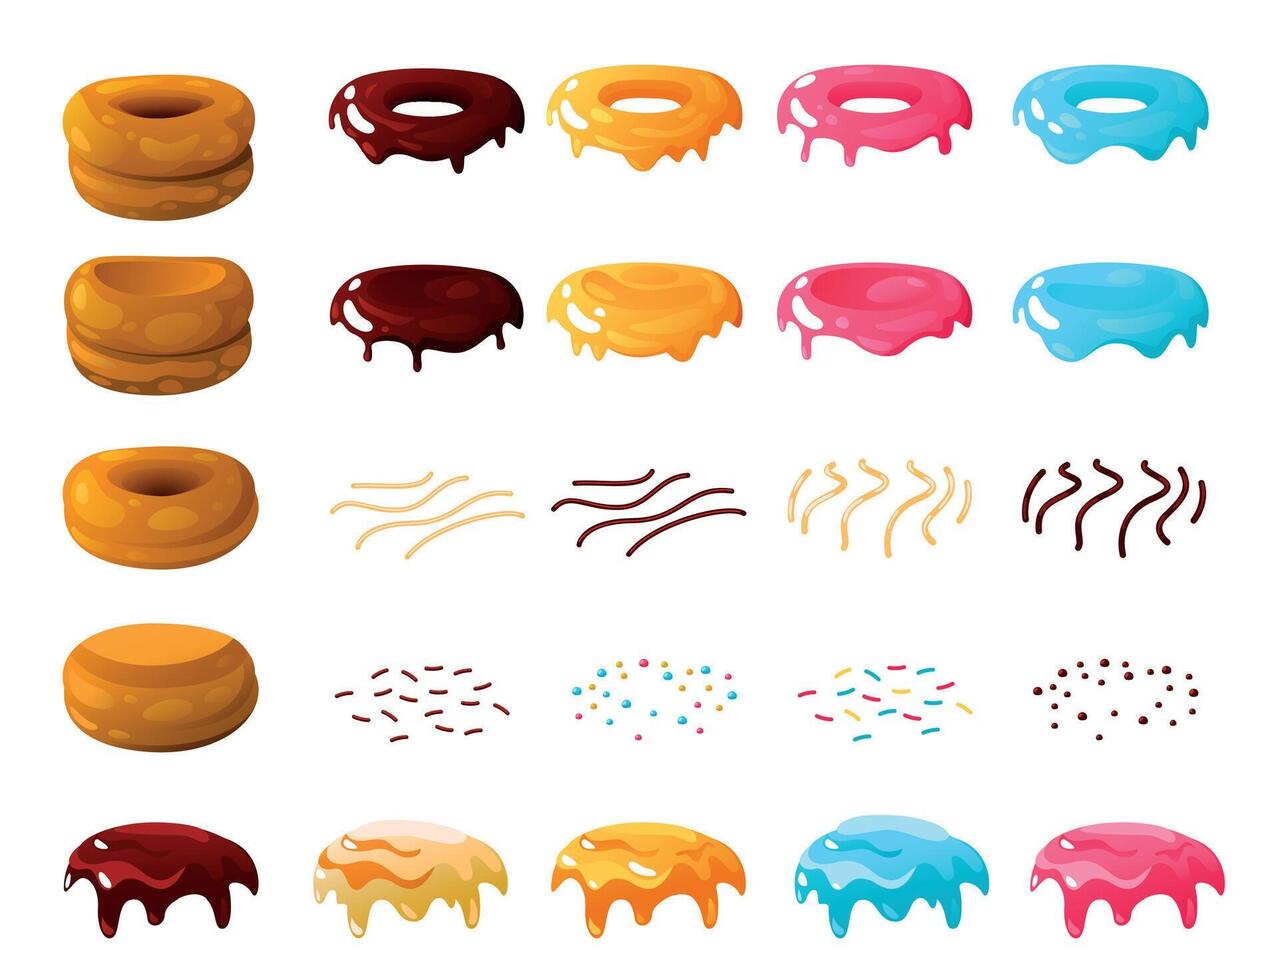 Donut cake kit. Cartoon bakery sweet doughnut types, colorful glazed pastry with toppings, tasty dessert bakery products. Vector isolated set